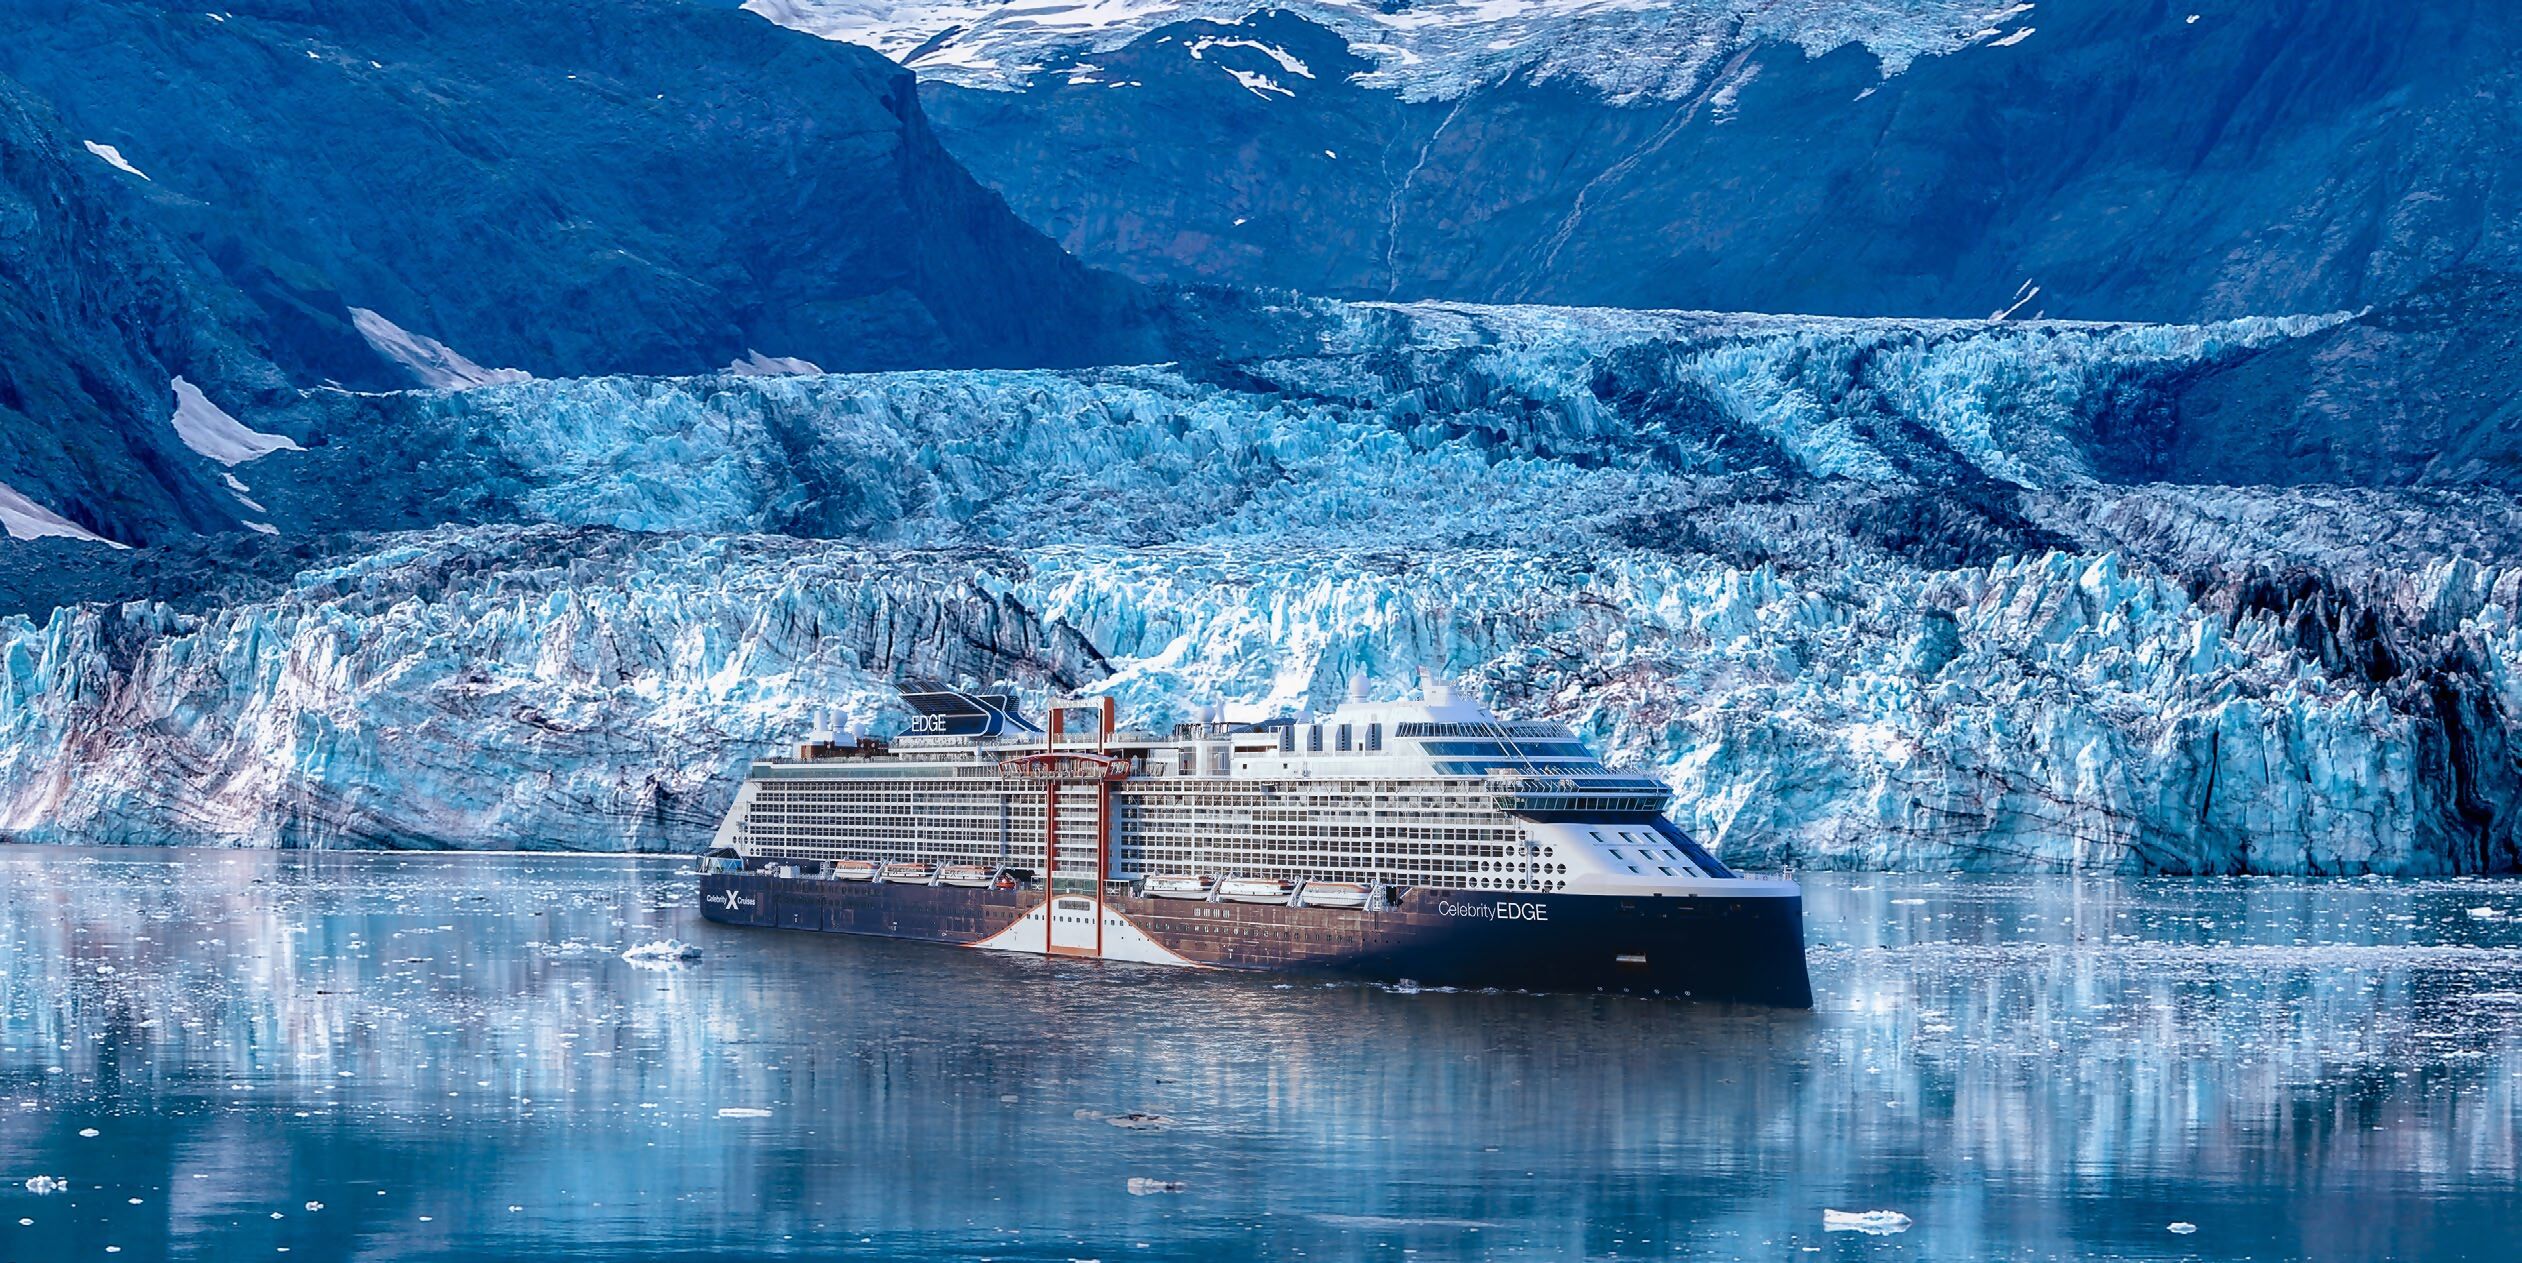 Discover The Greatest Places In Alaska On The World’s Greatest Cruise